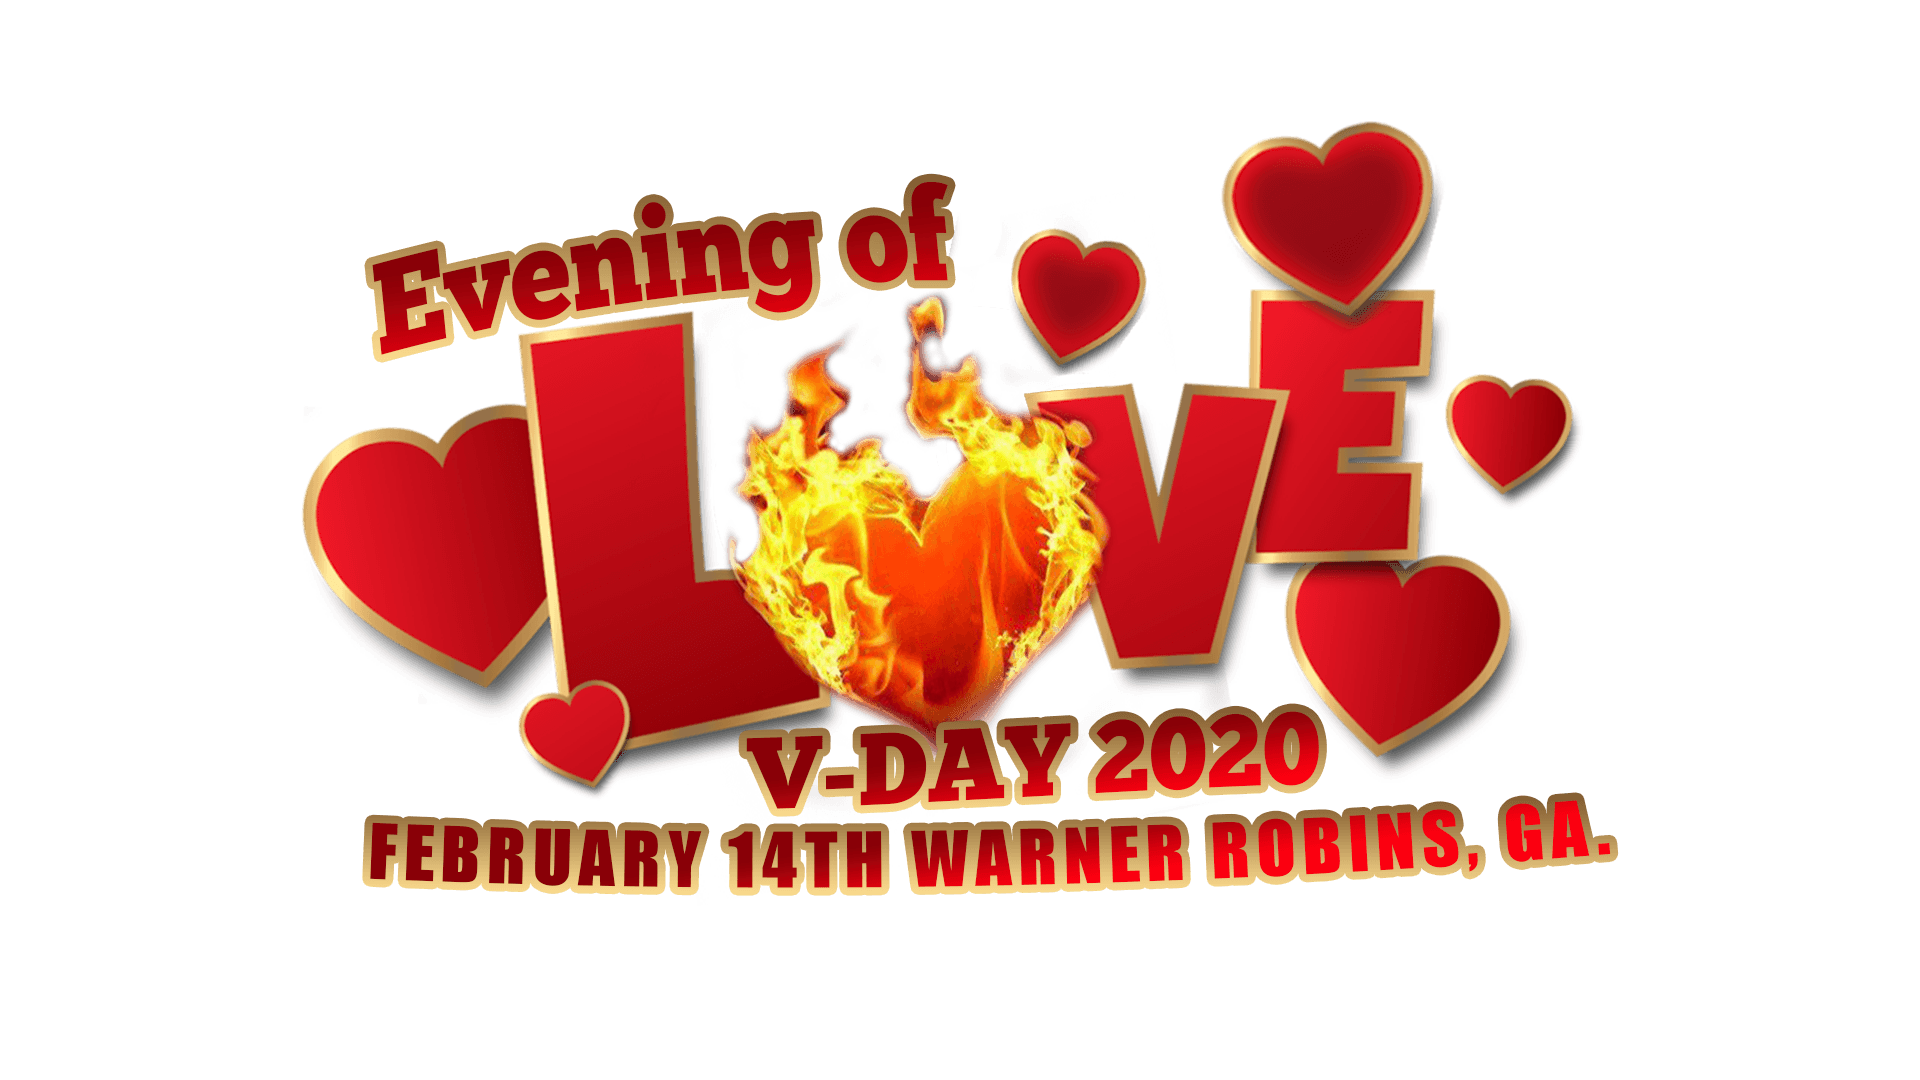 EVENING OF LOVE VALENTINES DAY EVENT